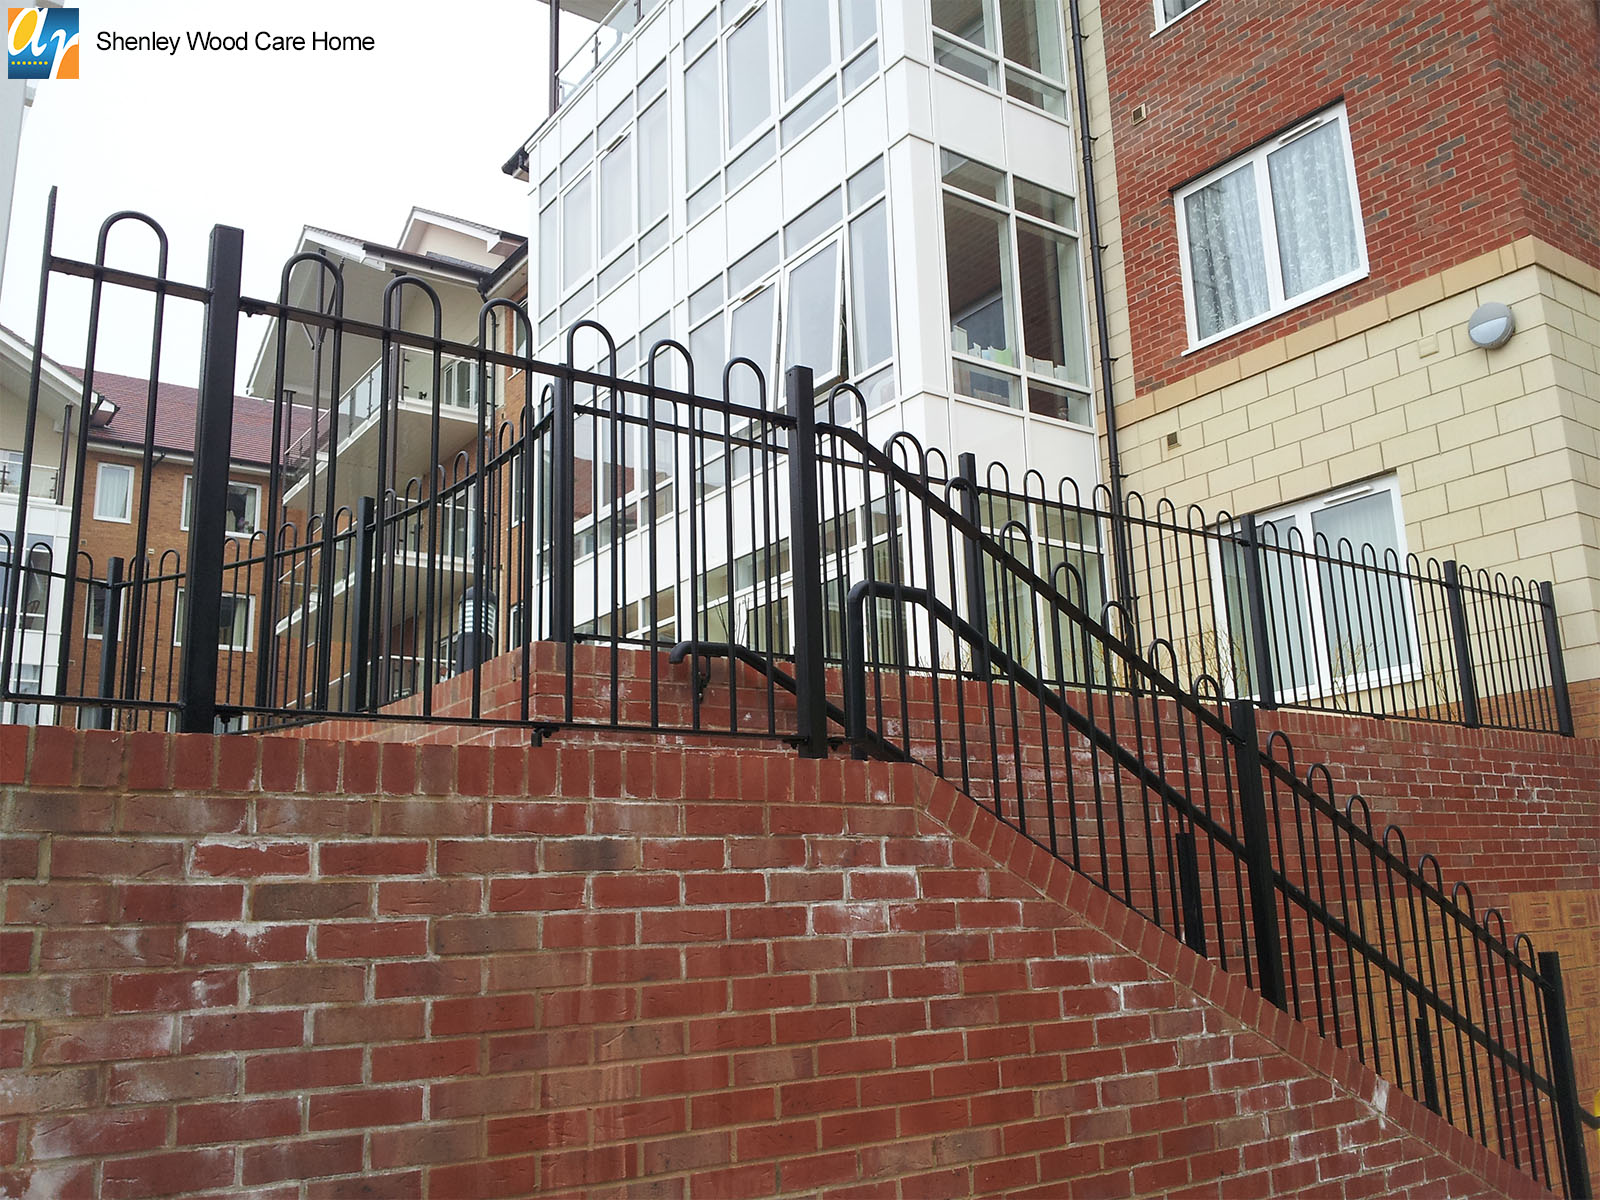 Shenley Wood Care Home standard bow top railings